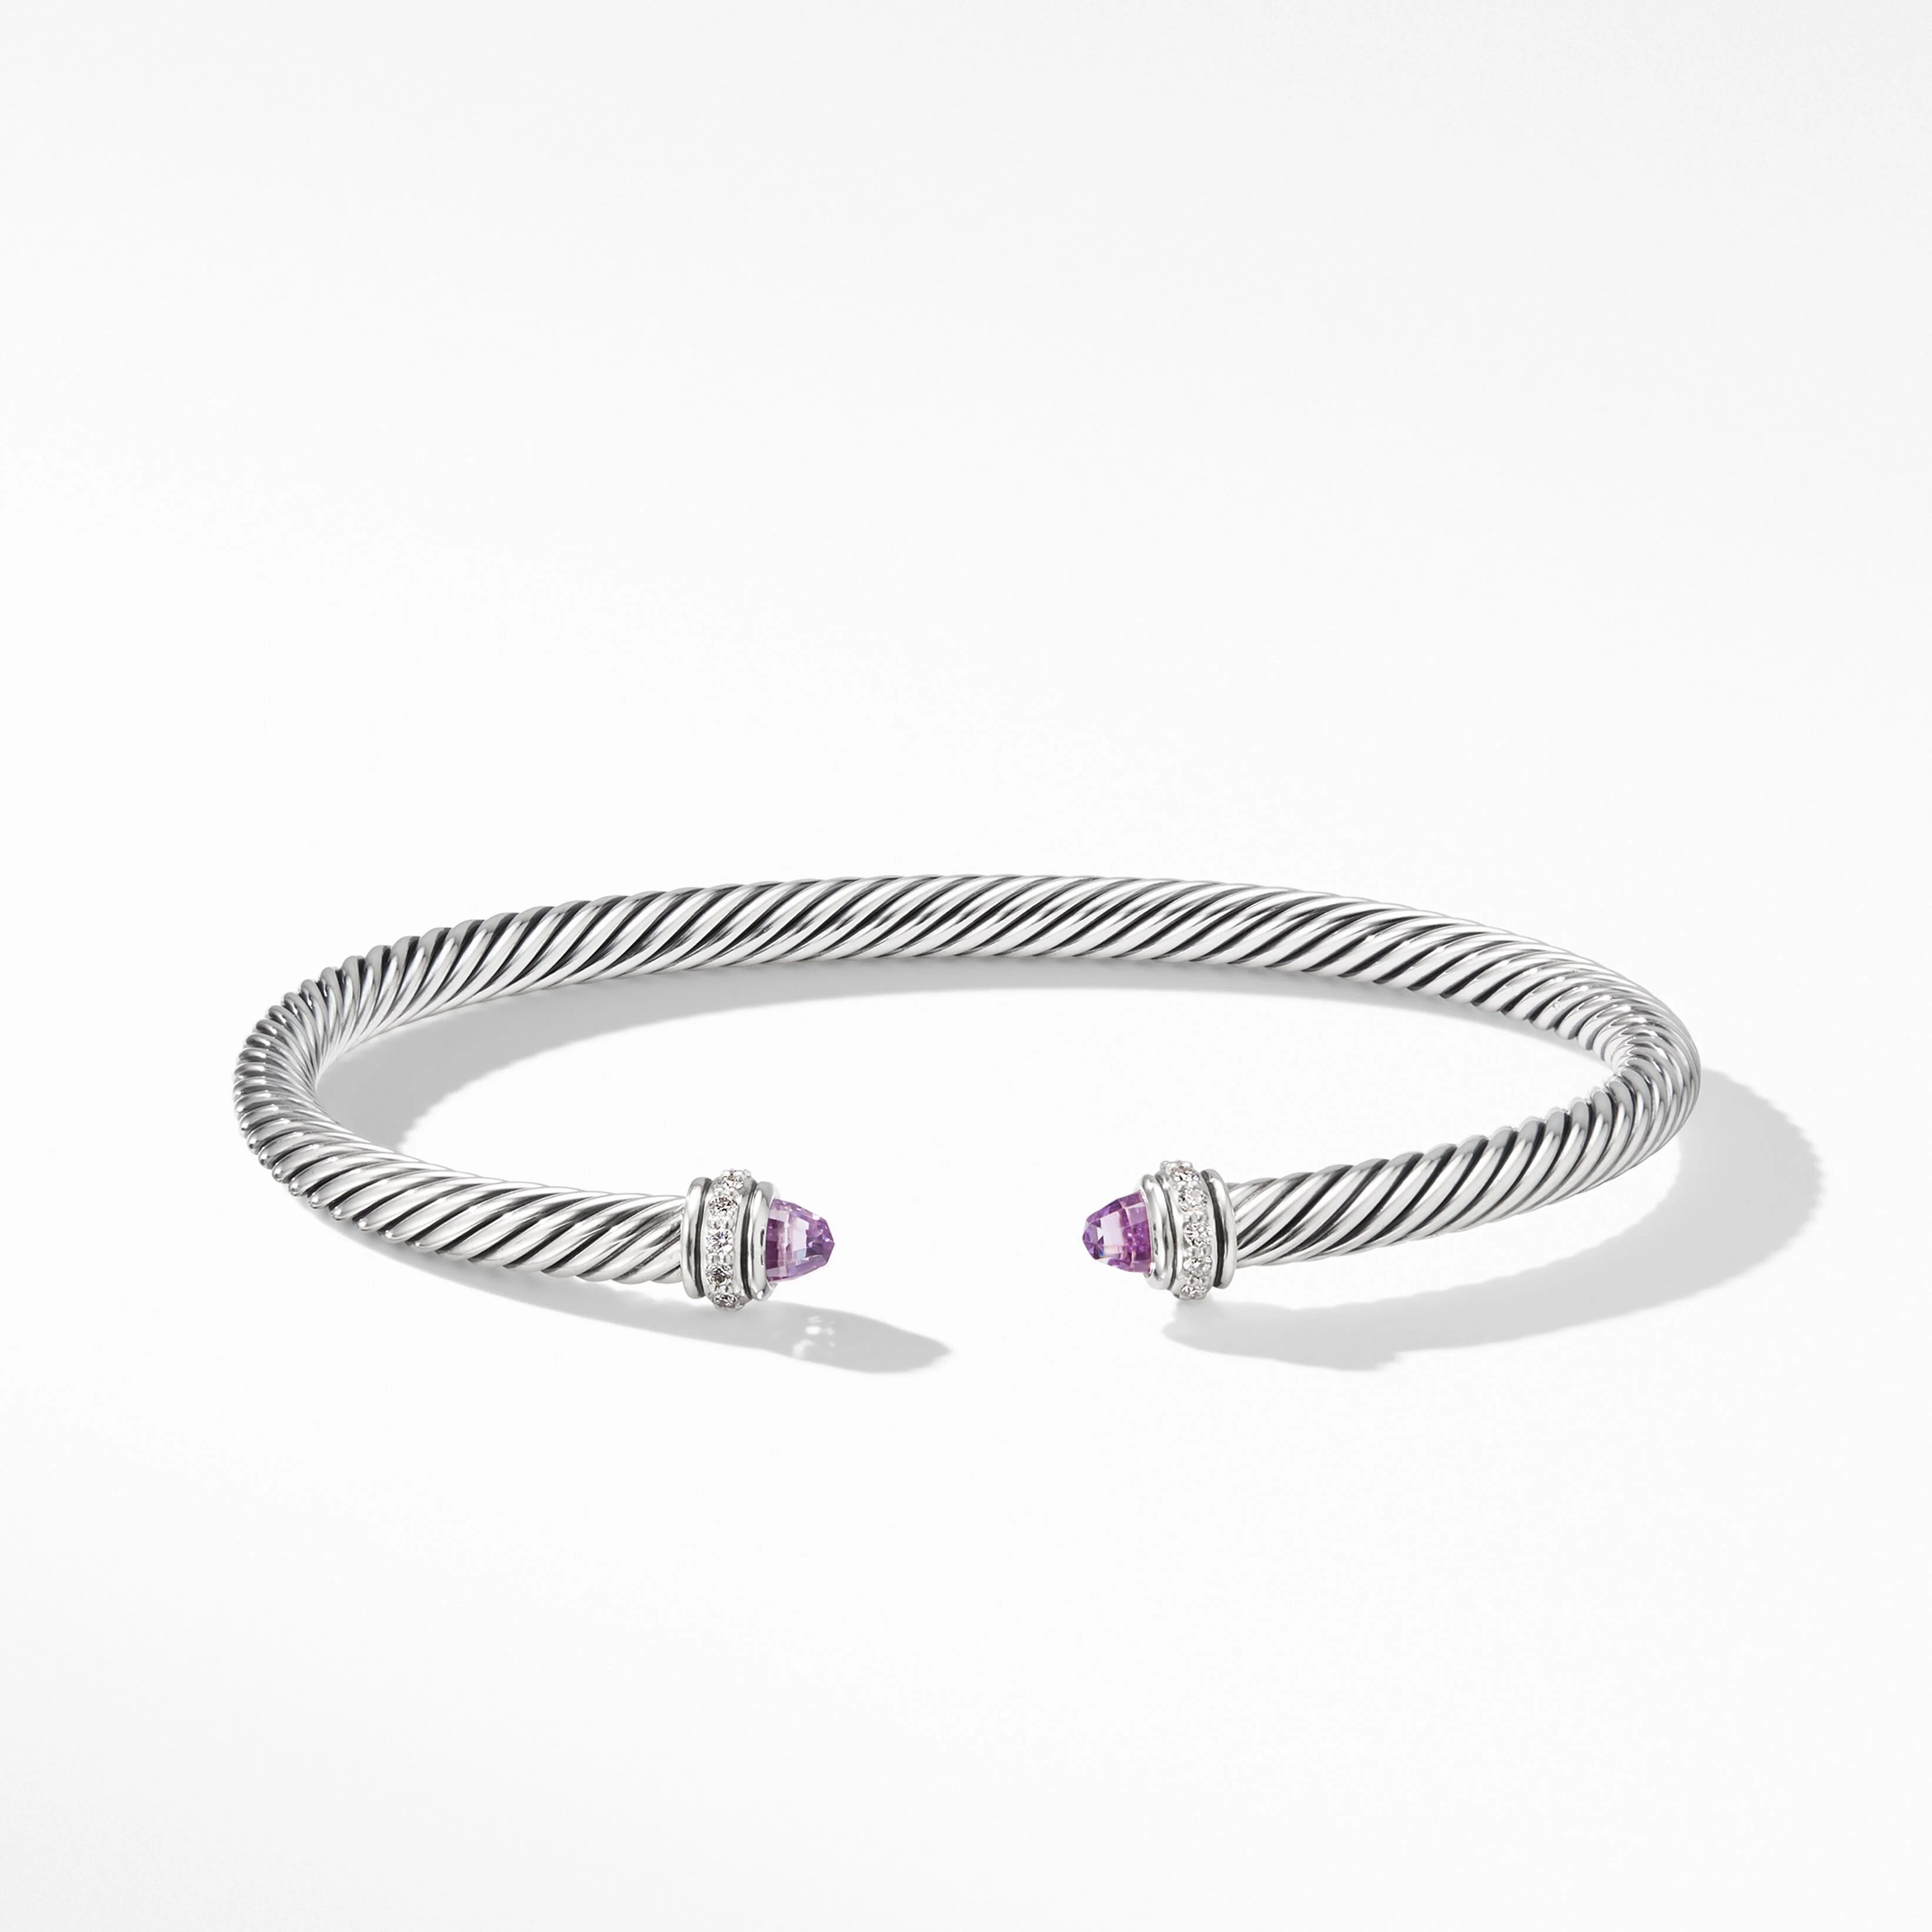 Cable Classics Bracelet in Sterling Silver with Amethyst and Pavé Diamonds | David Yurman